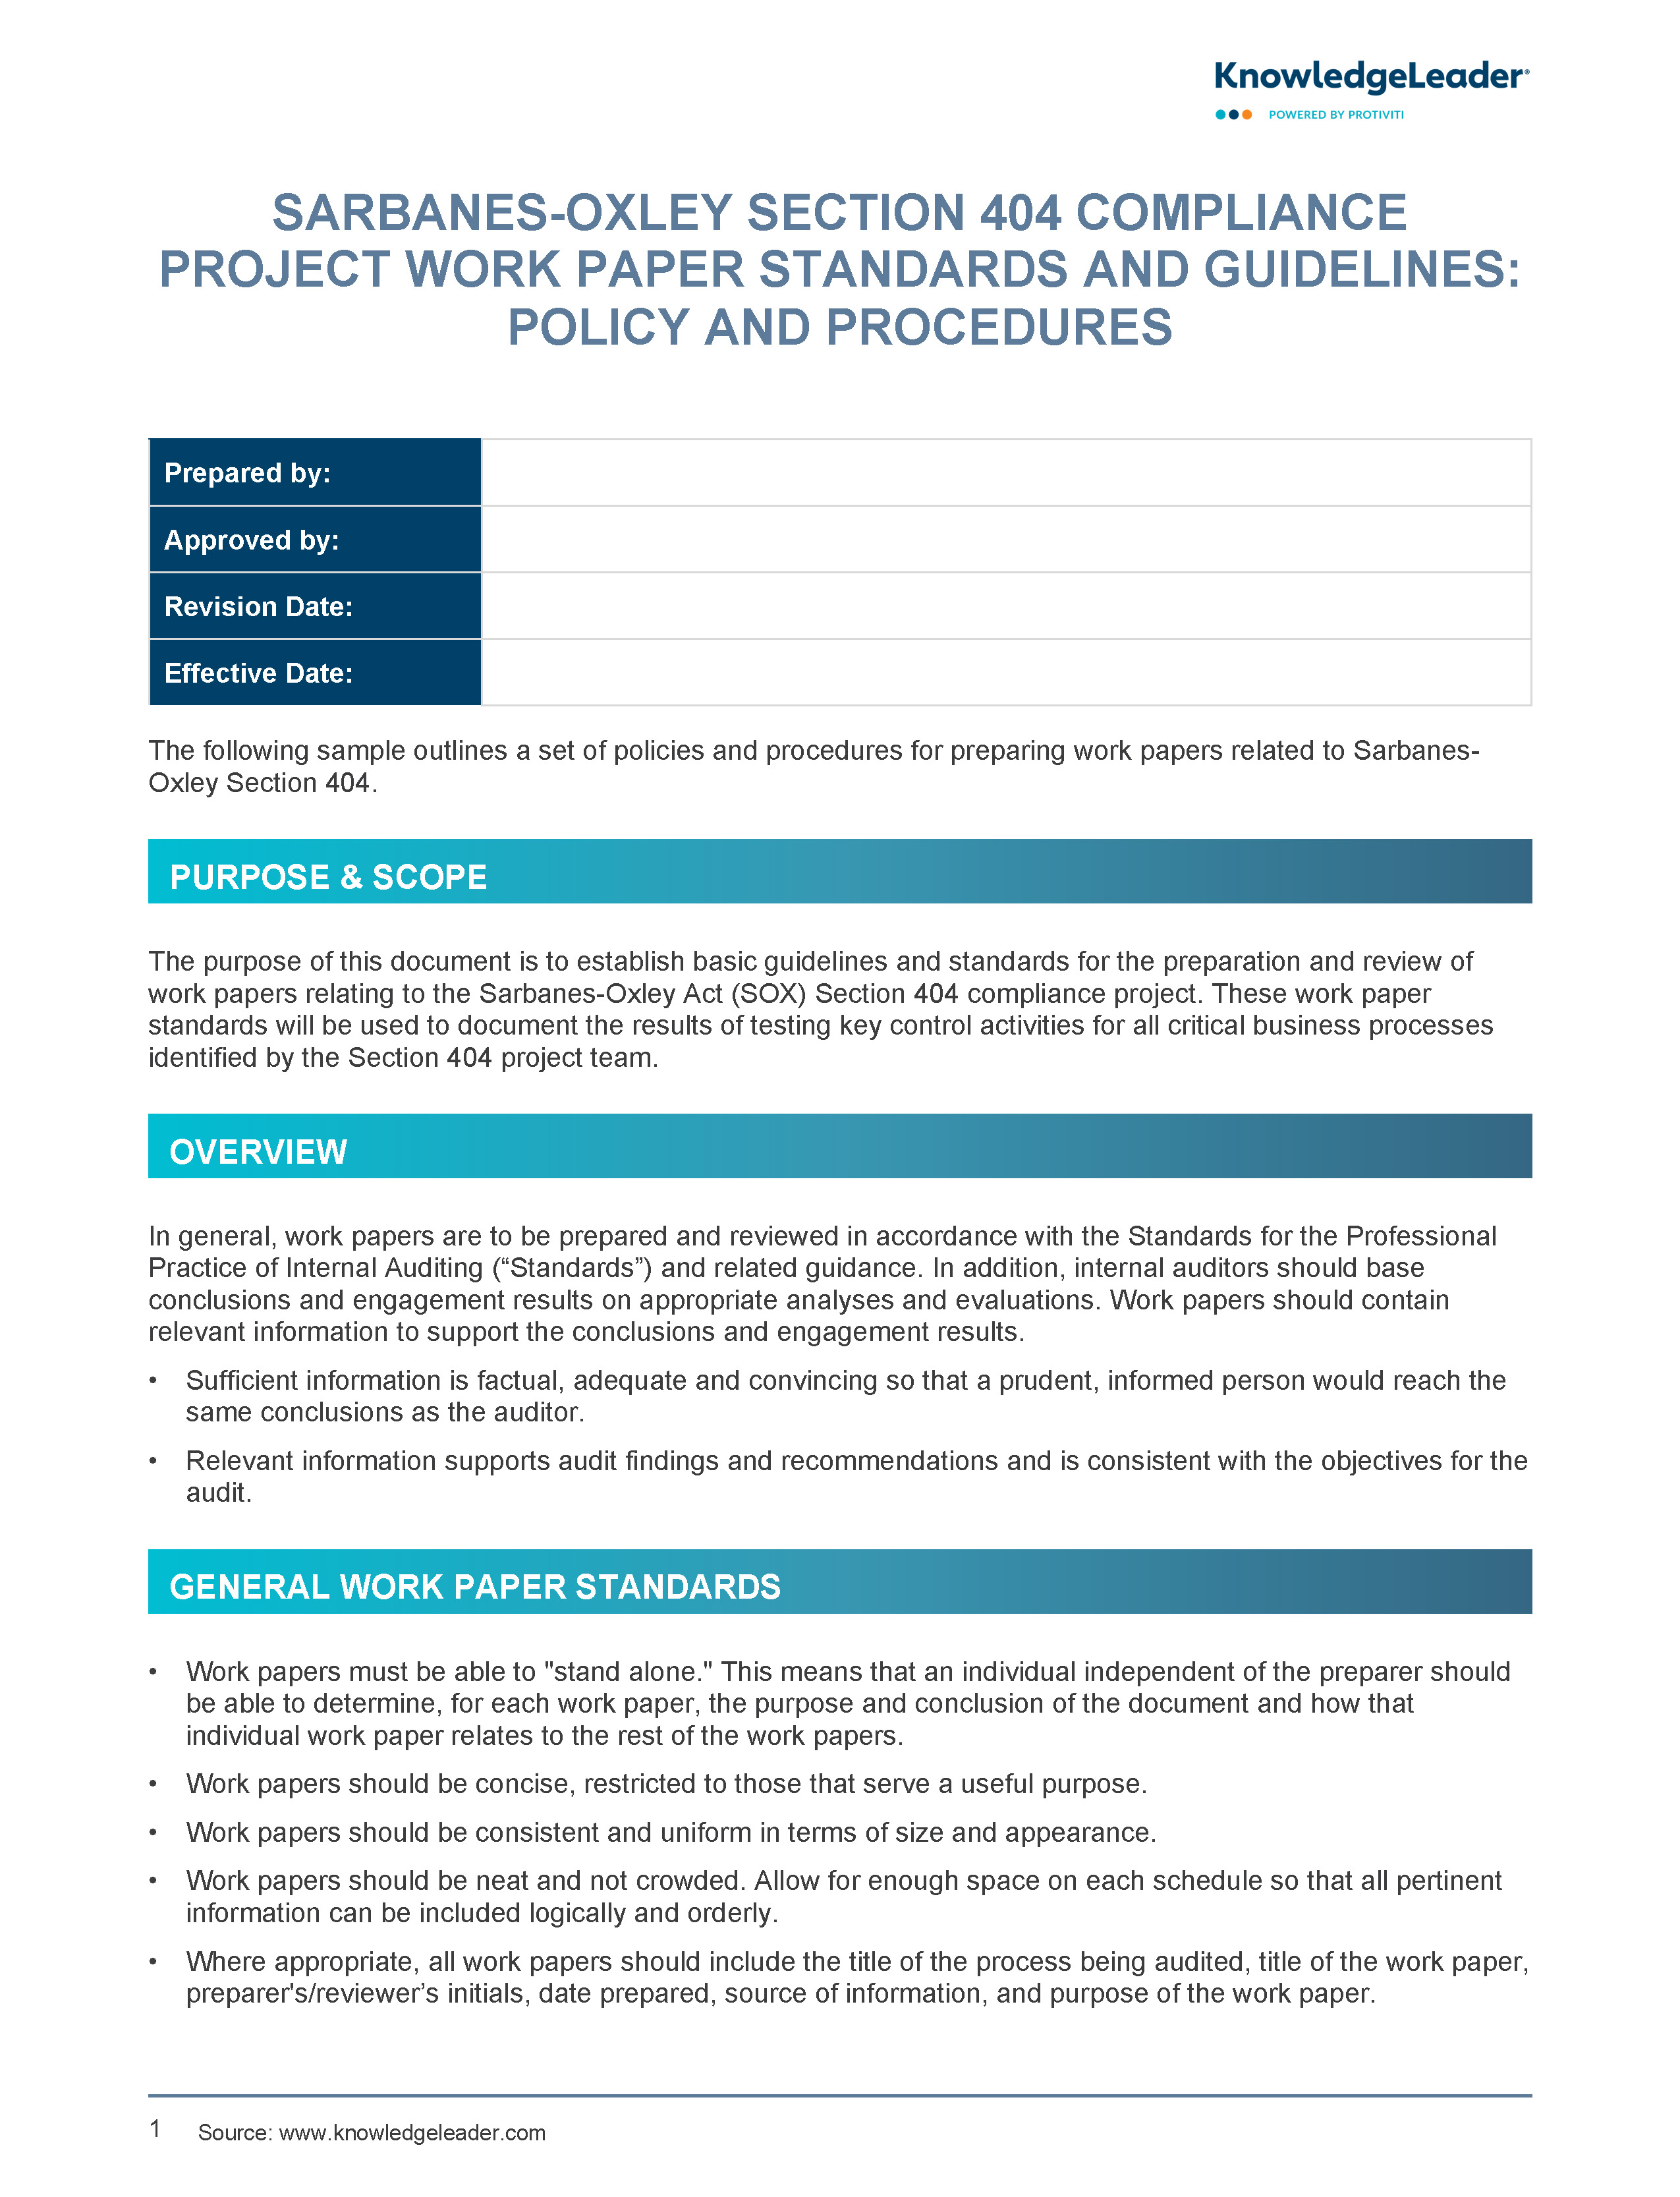 Sarbanes-Oxley Section 404 Compliance Project Work Paper Standards and Guidelines